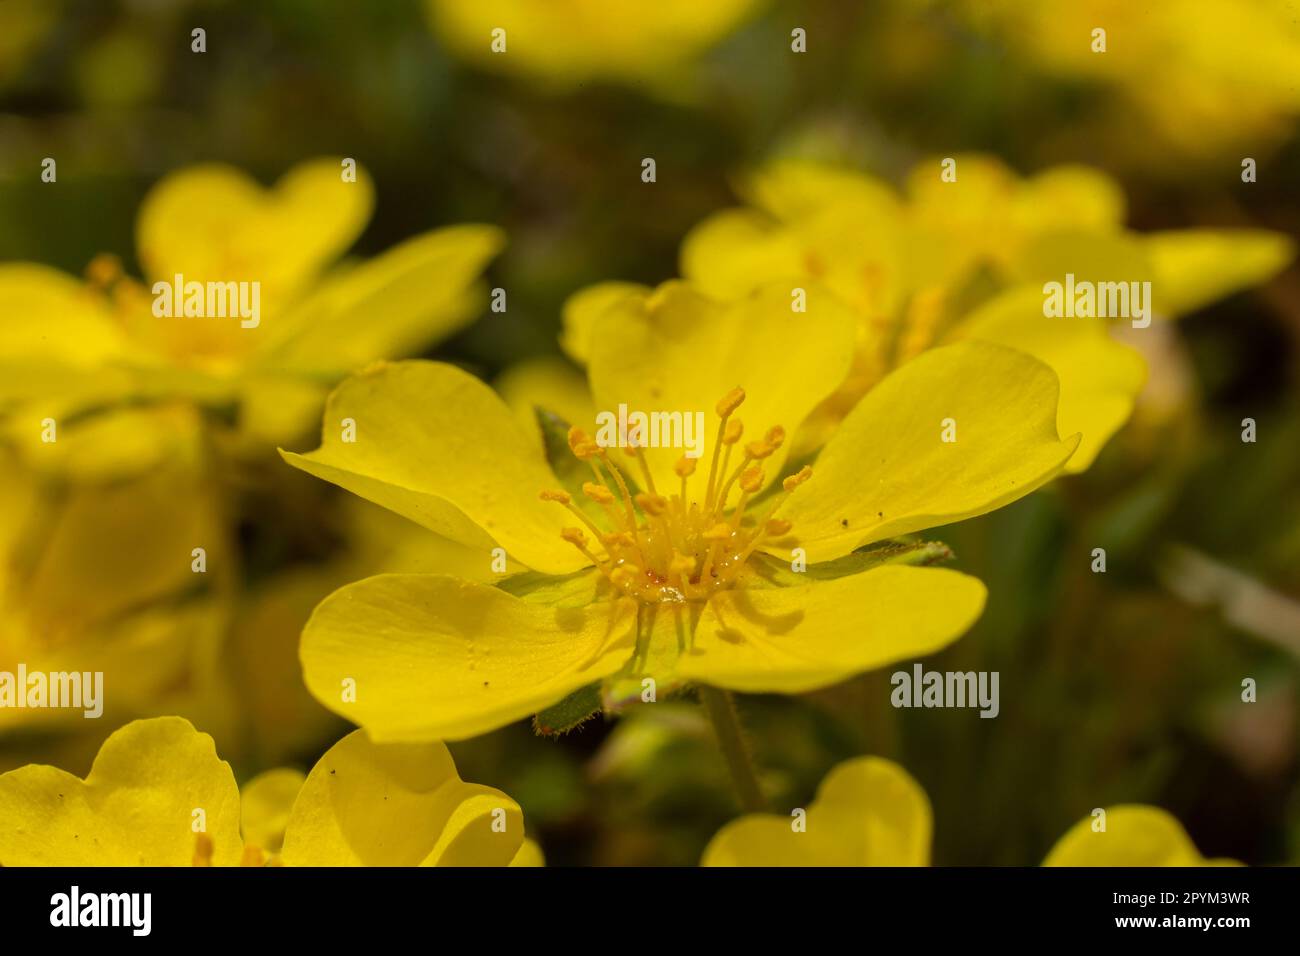 Potentilla neumanniana is a shrub with yellow flowers. Stock Photo